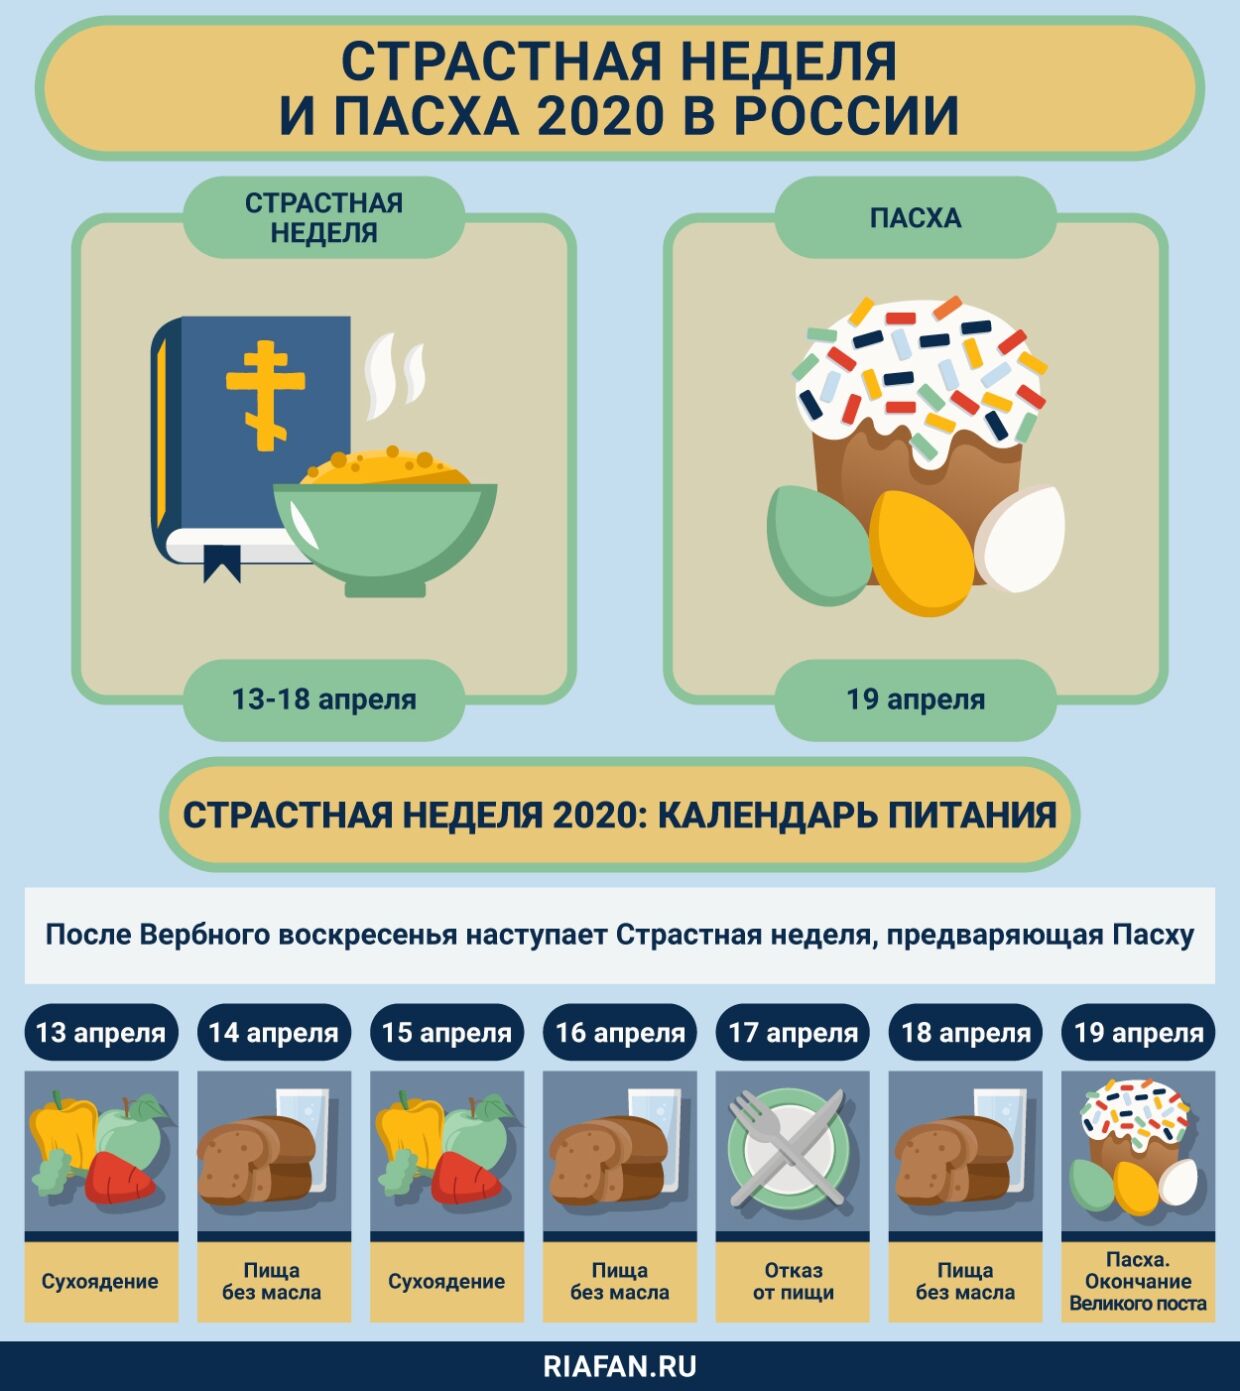 Clean thursday 2020: preparation for Easter, traditions and rites, Easter cake recipe, Don'ts